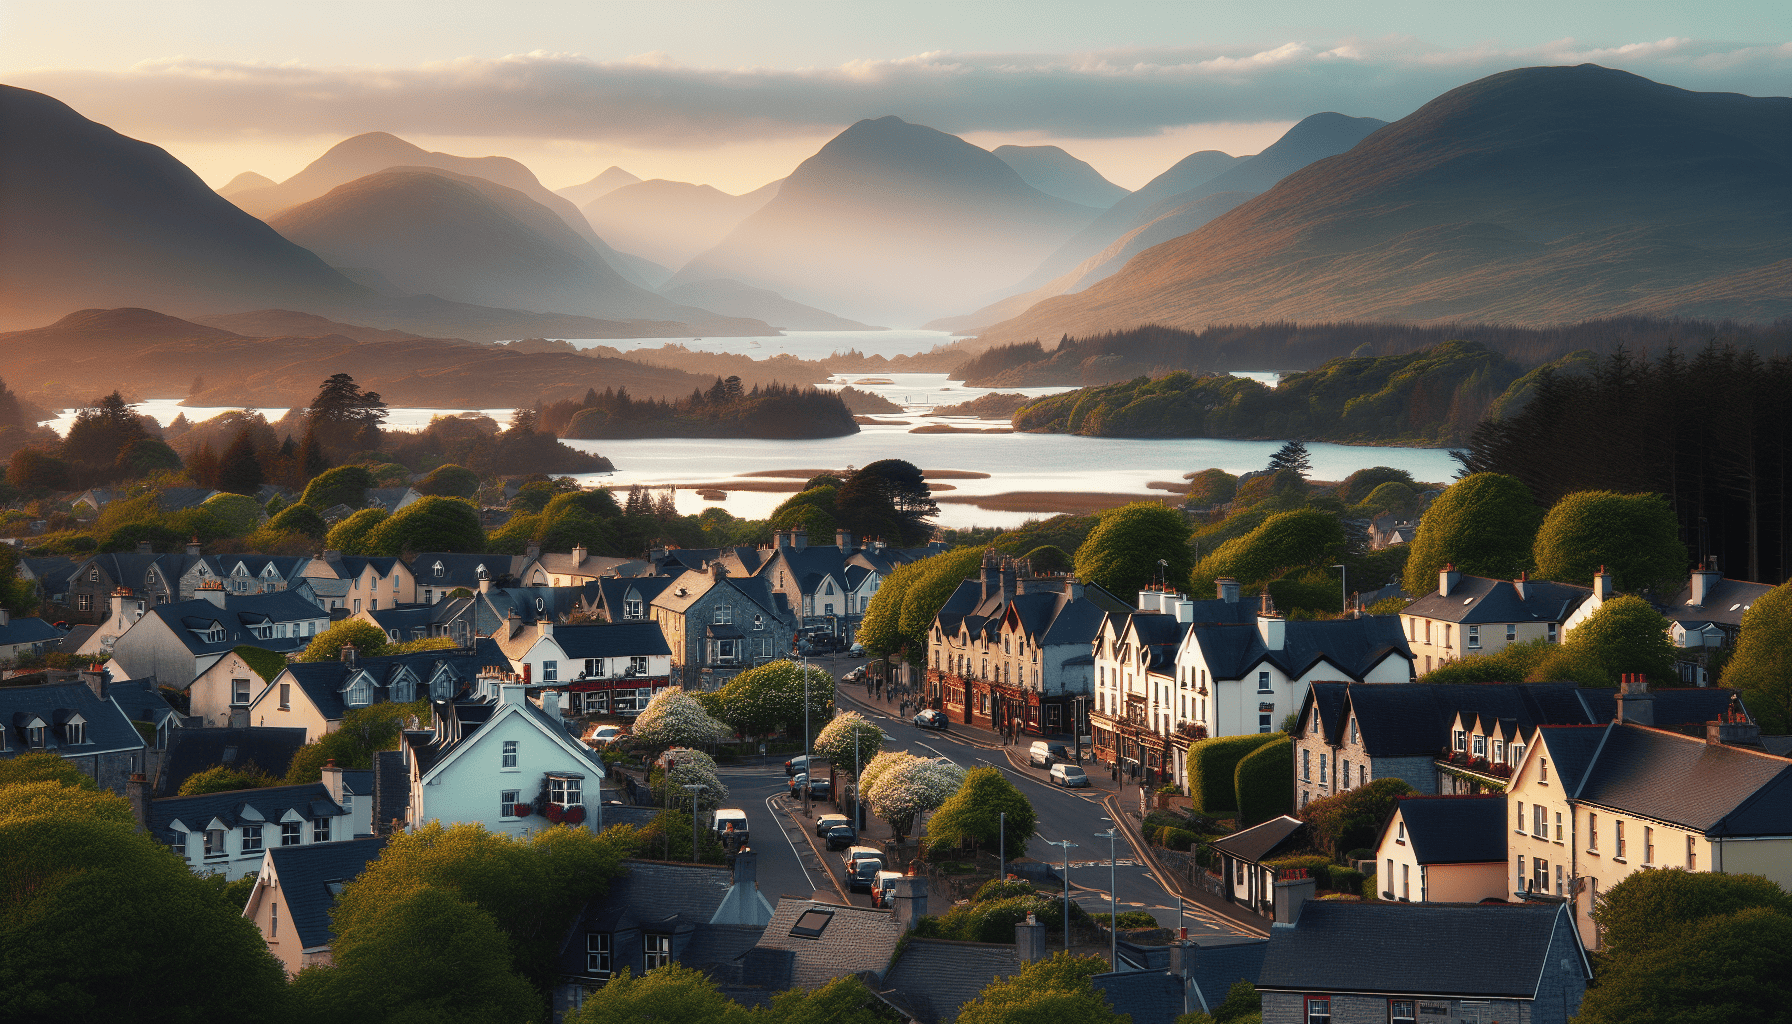 The charming town of Killarney with Killarney National Park in the background